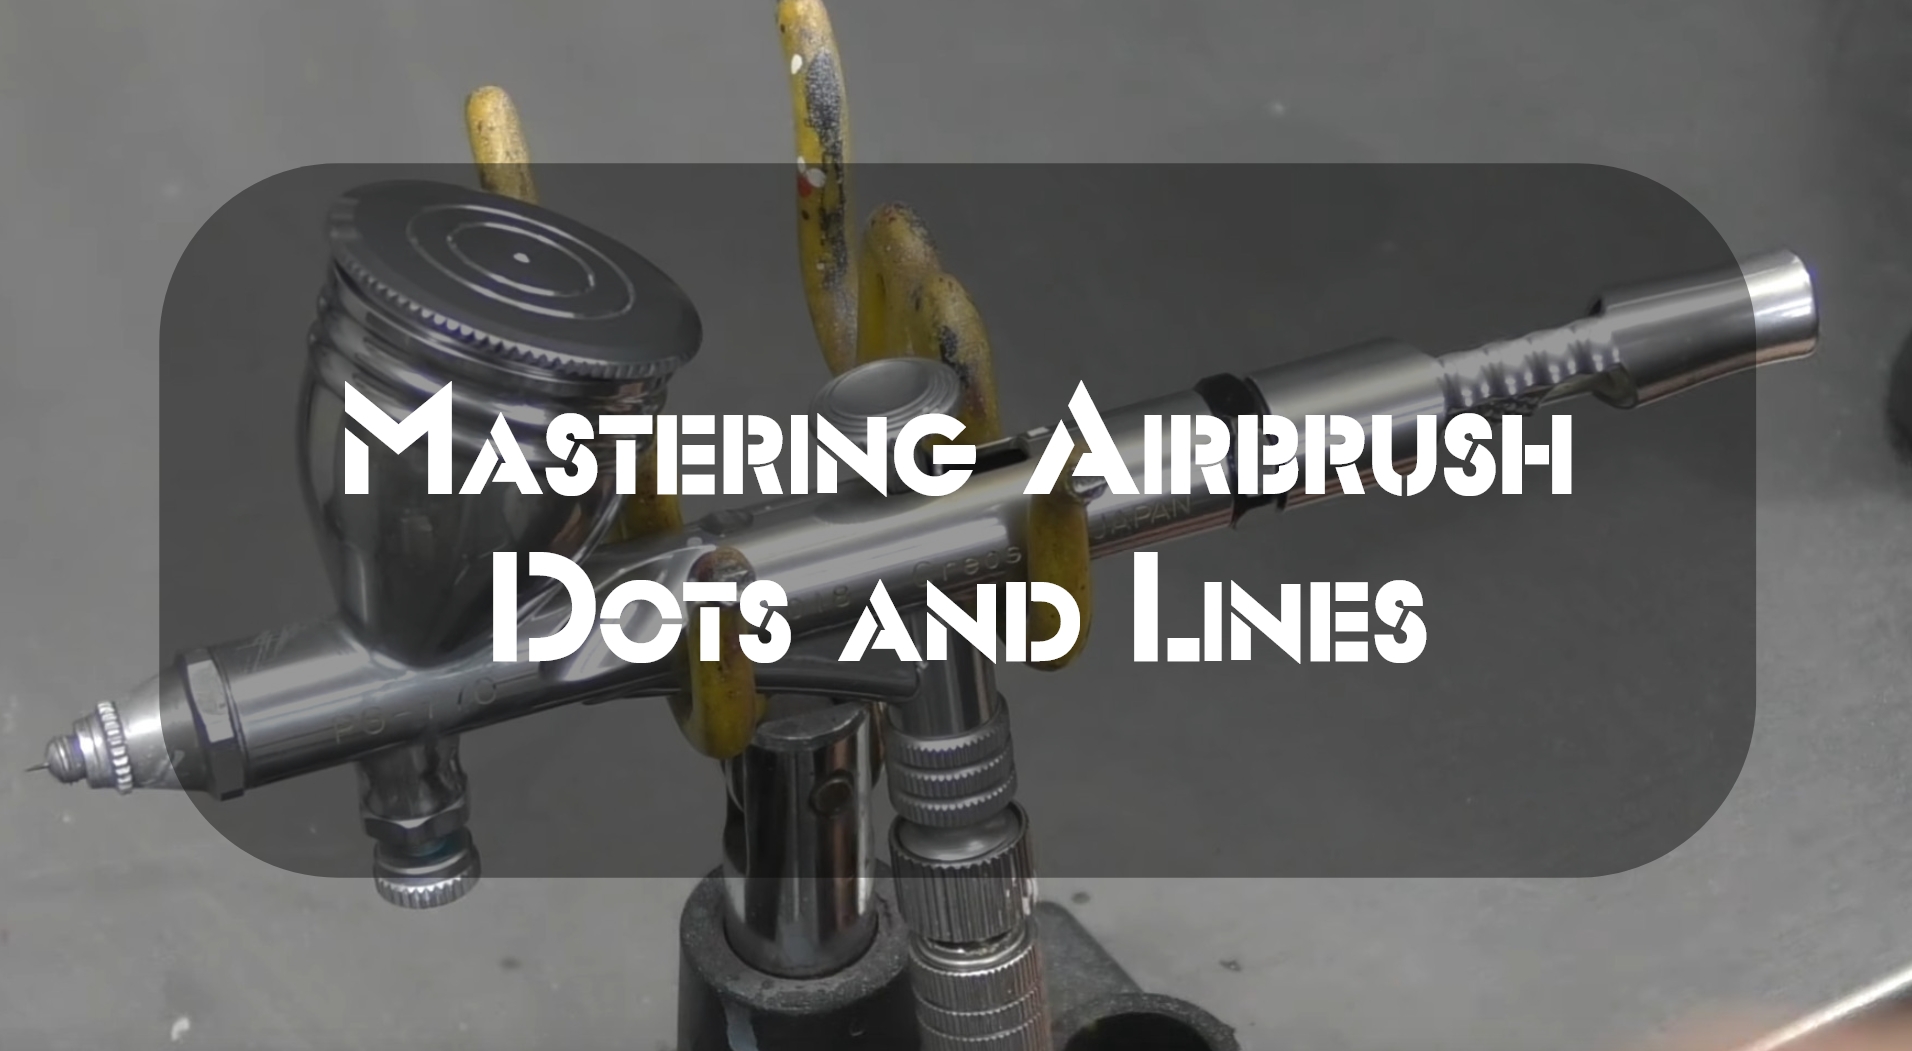 Mastering Airbrush Dots and Lines